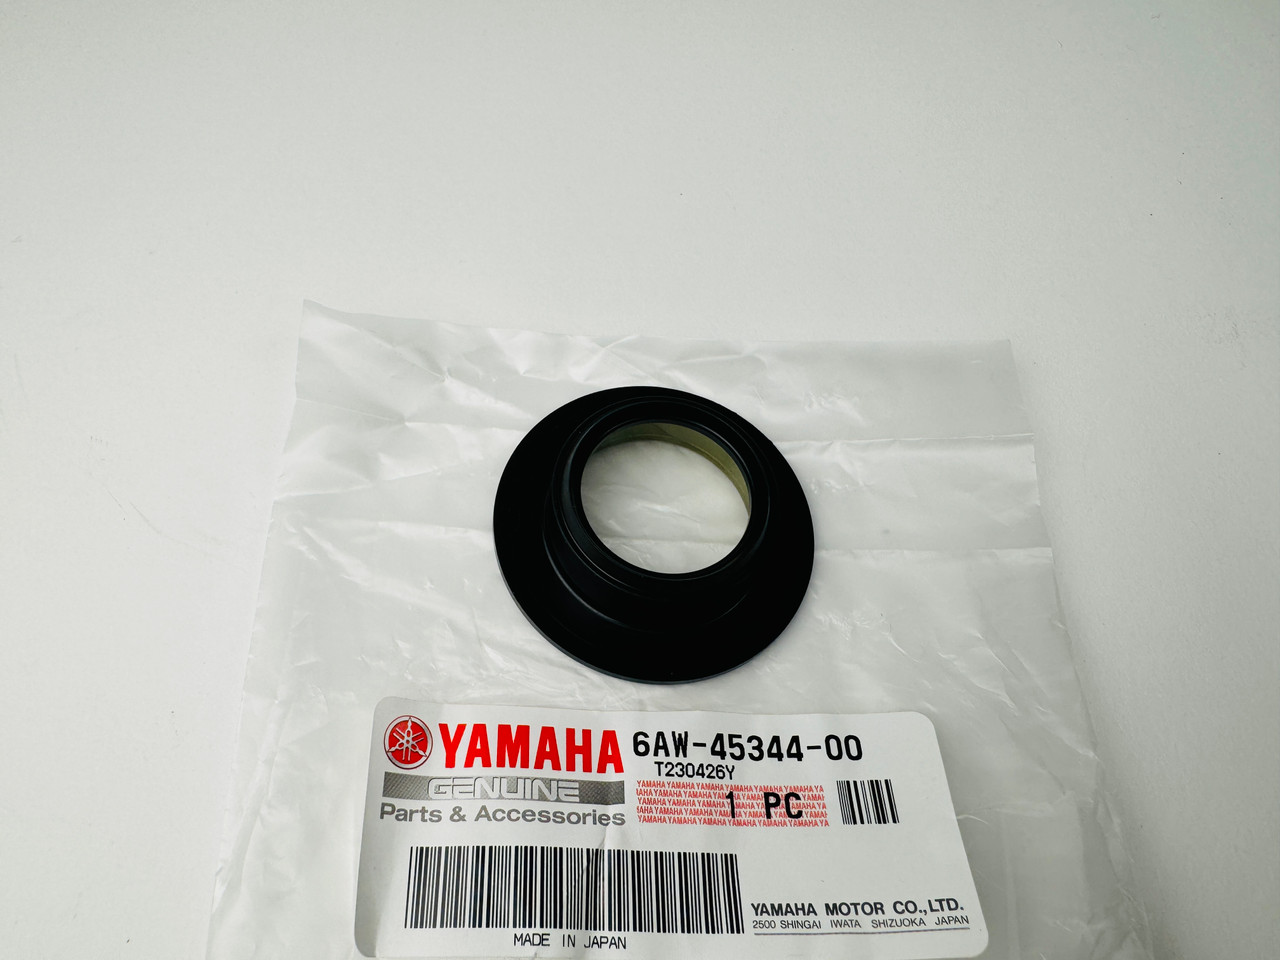 $19.99* GENUINE YAMAHA no tax* COVER, OIL SEAL 6AW-45344-00-00 *In Stock & Ready To Ship!